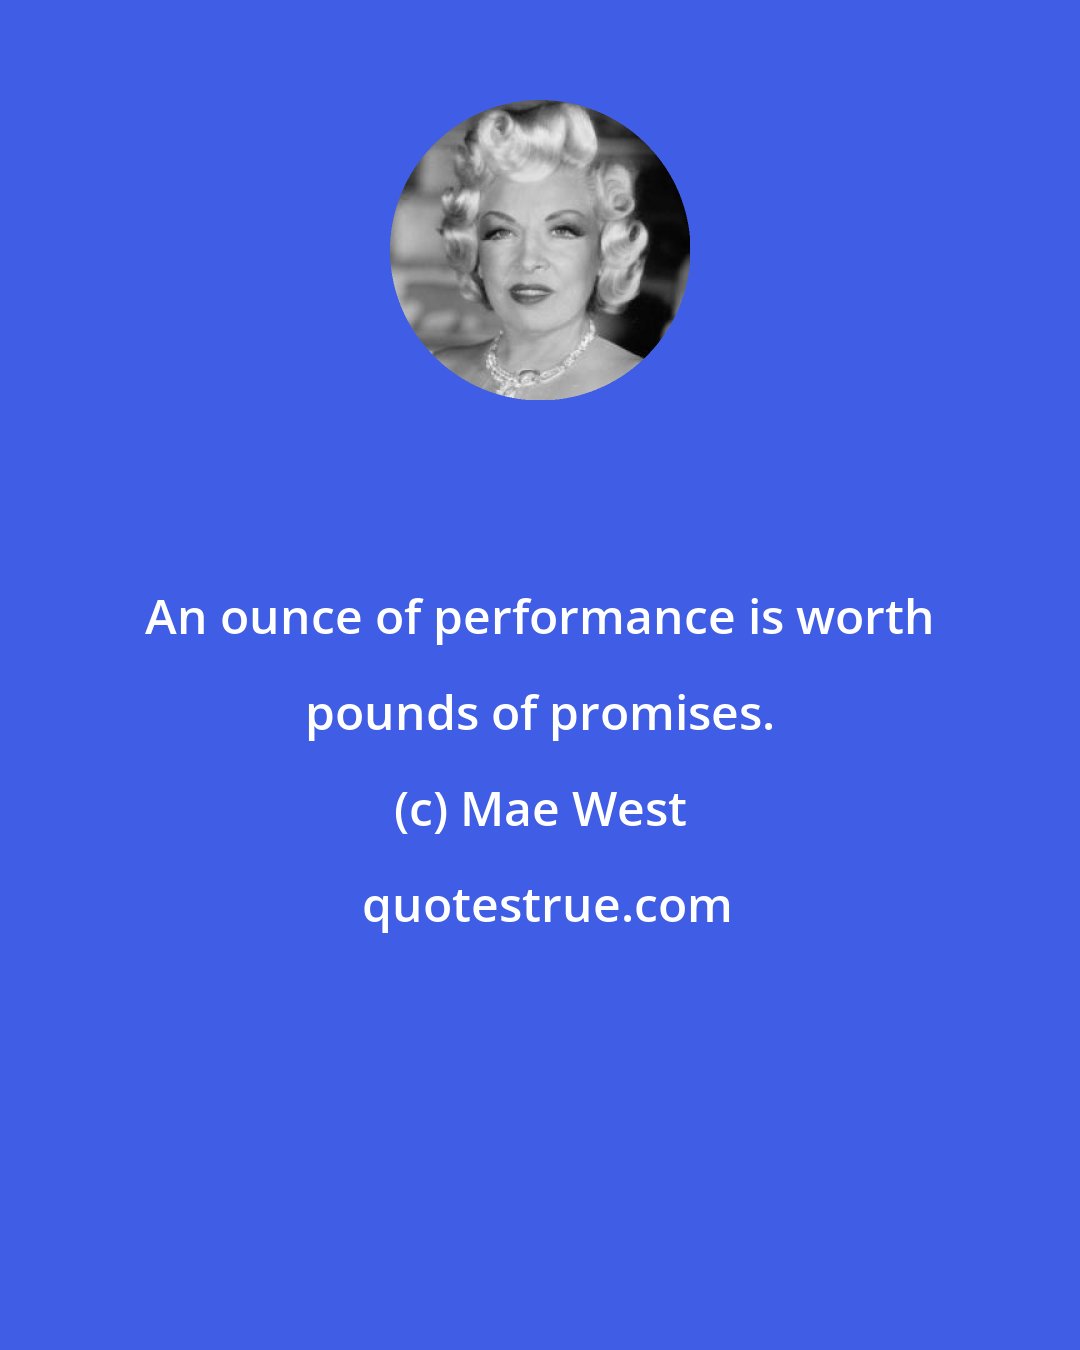 Mae West: An ounce of performance is worth pounds of promises.